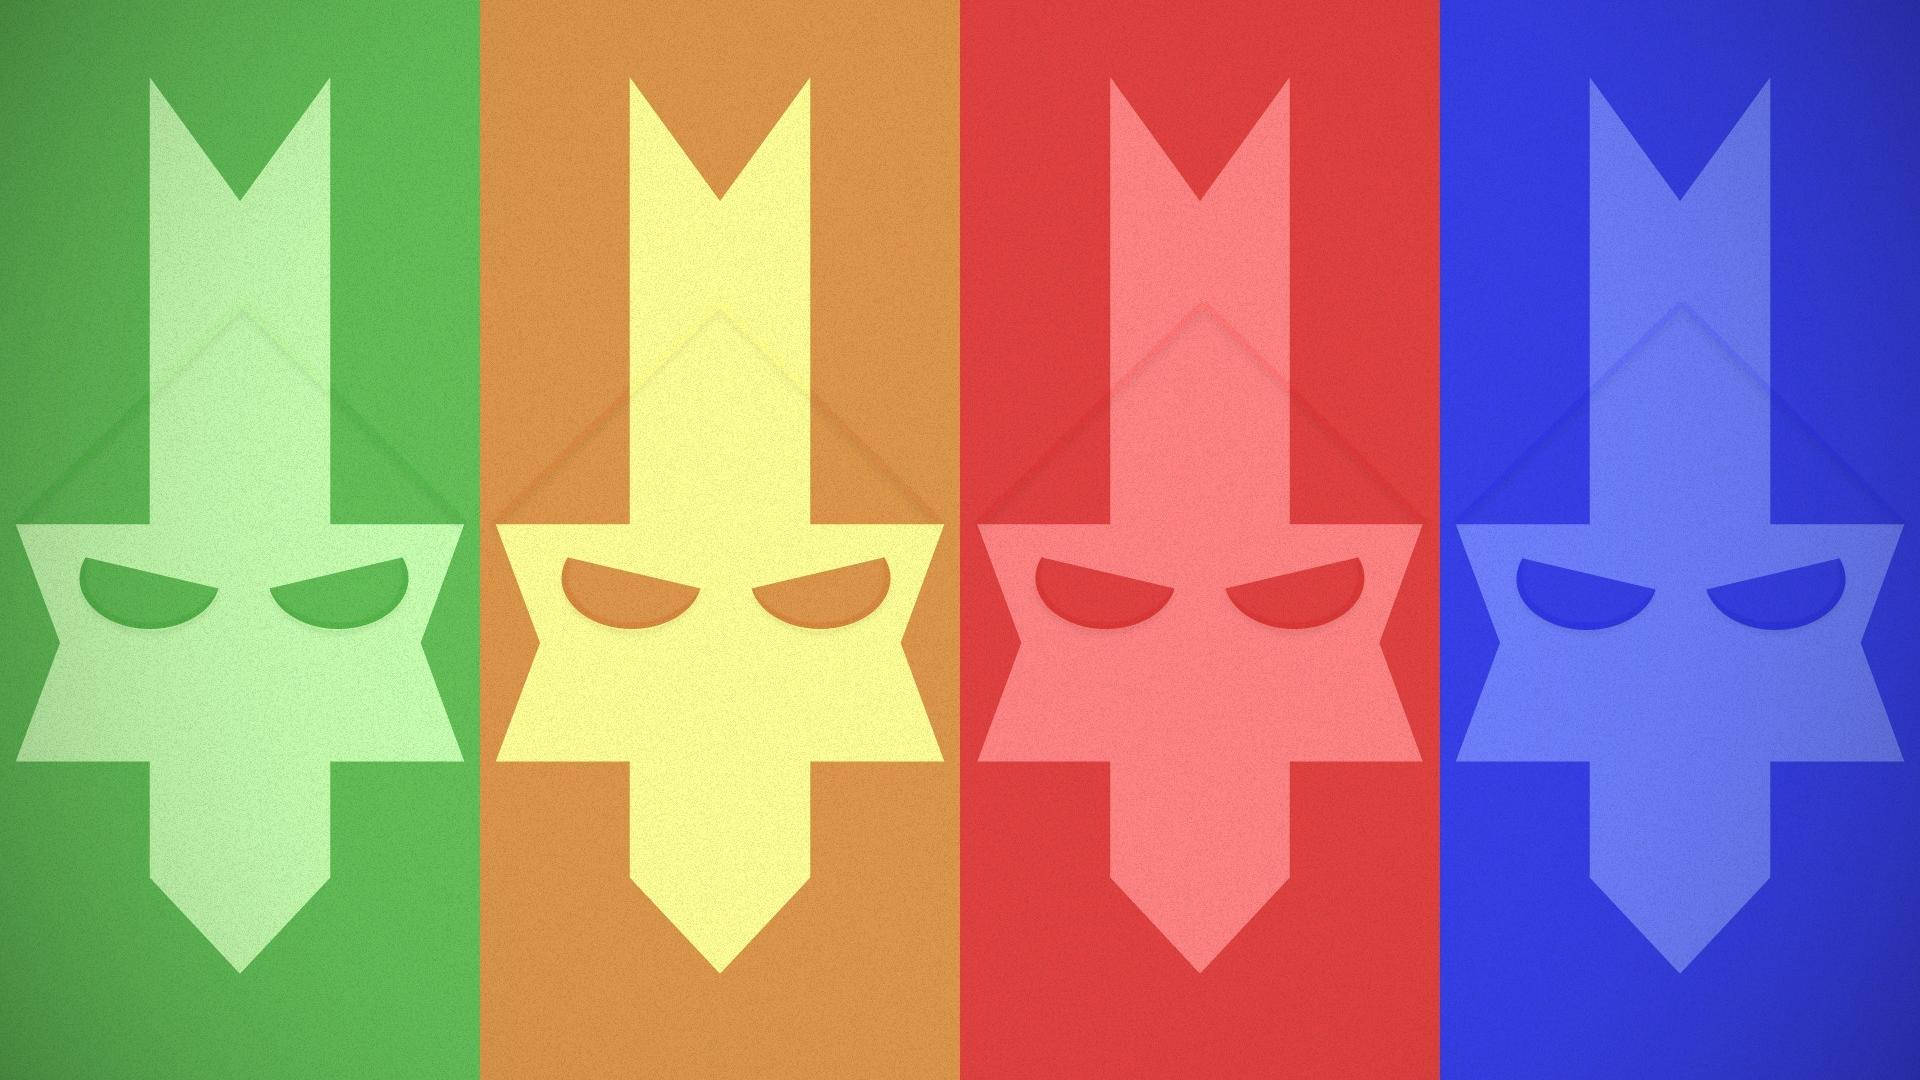 Castle Crashers Four Knights Faces Background